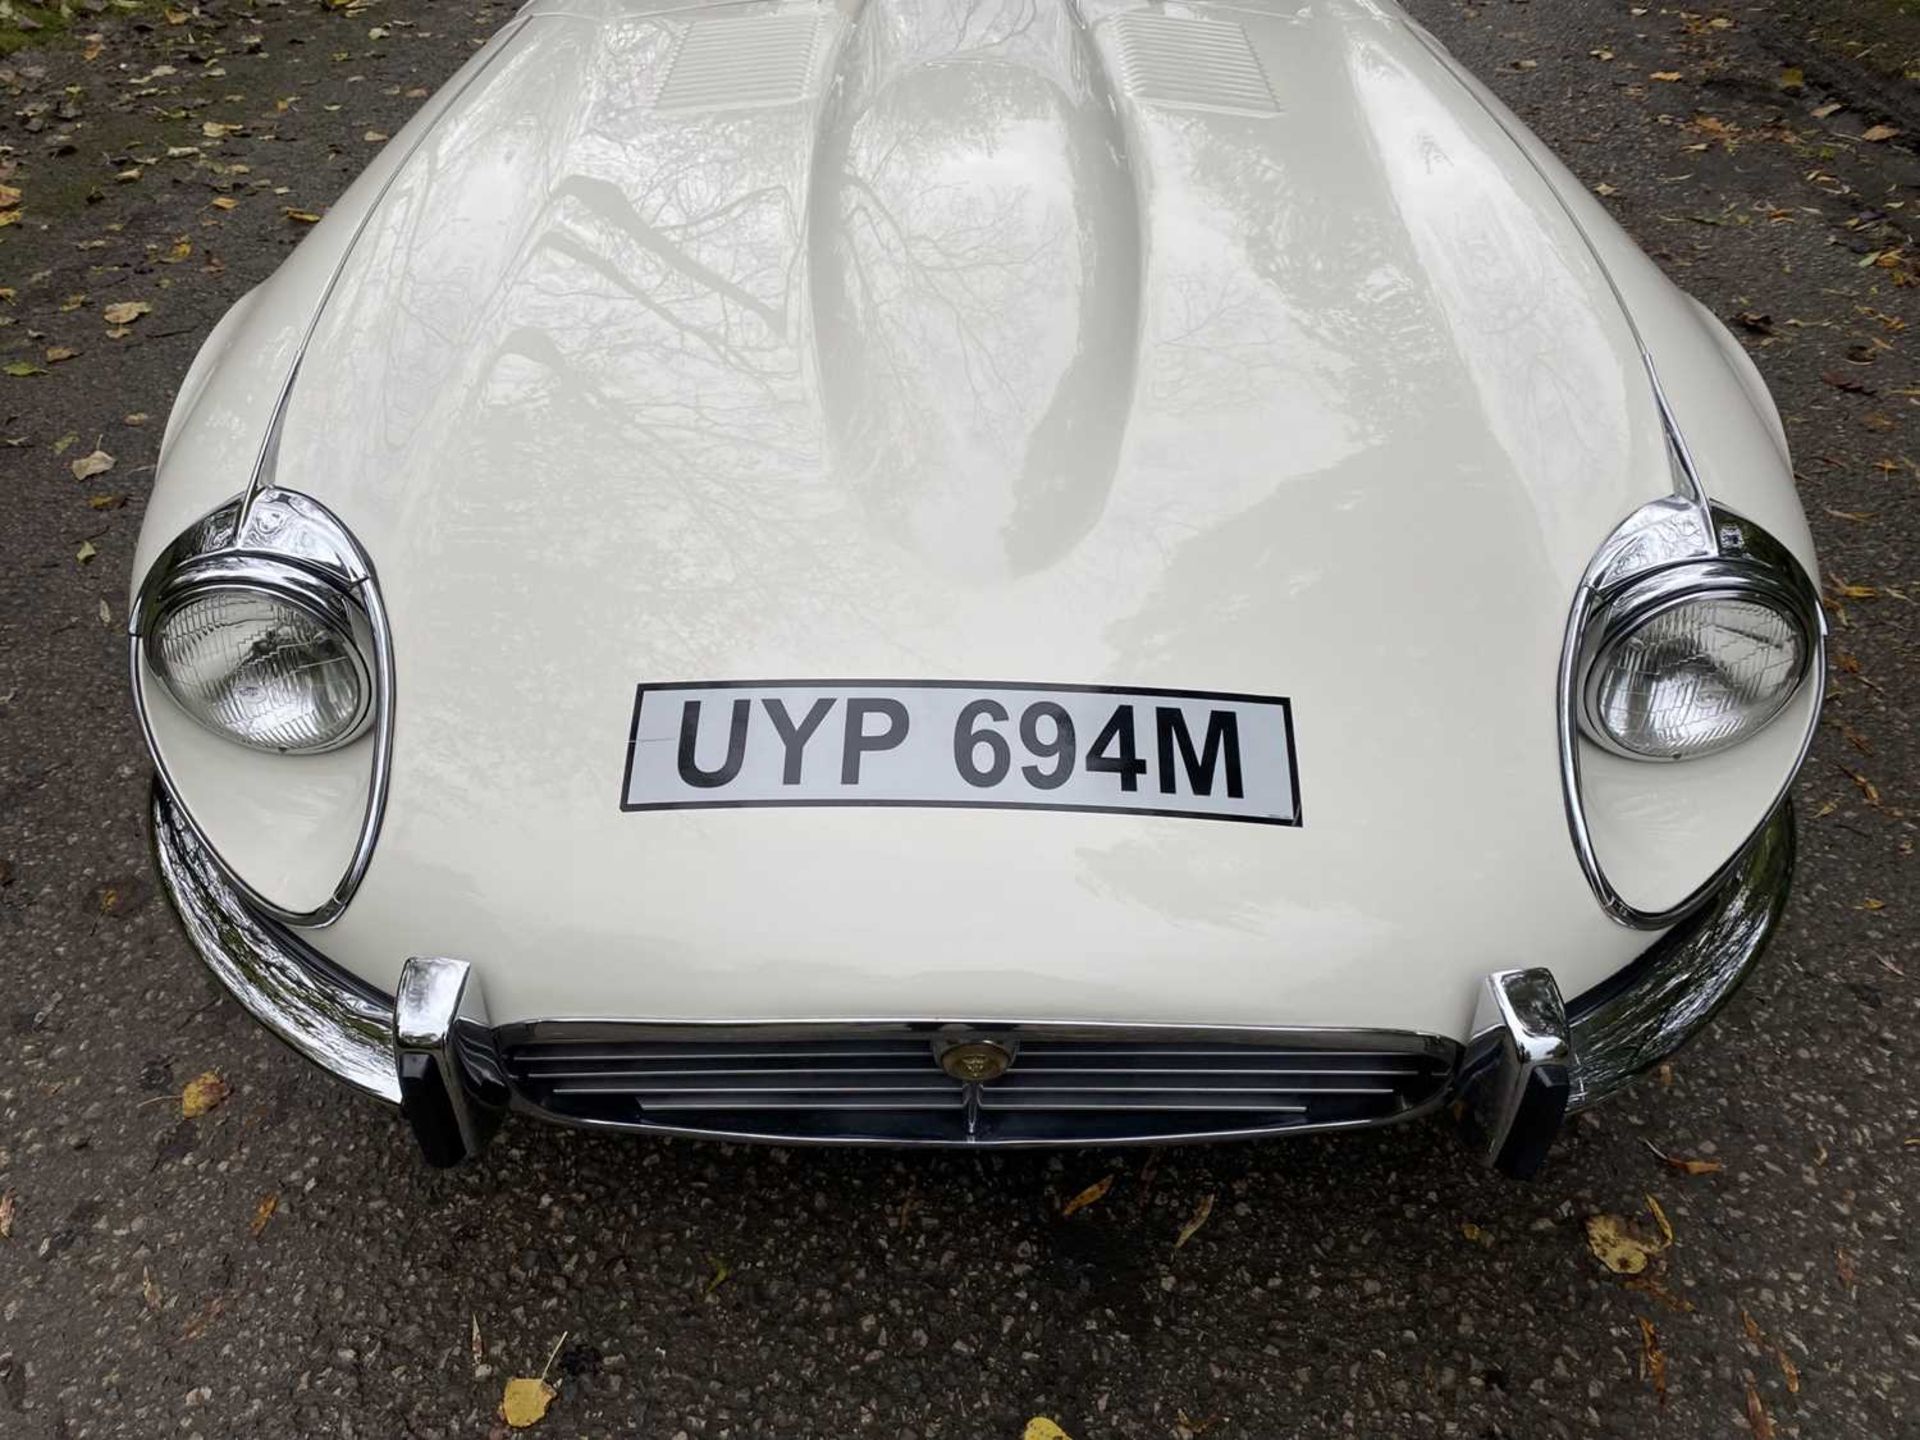 1973 Jaguar E-Type V12 Roadster As seen in Only Fools and Horses - Image 98 of 105